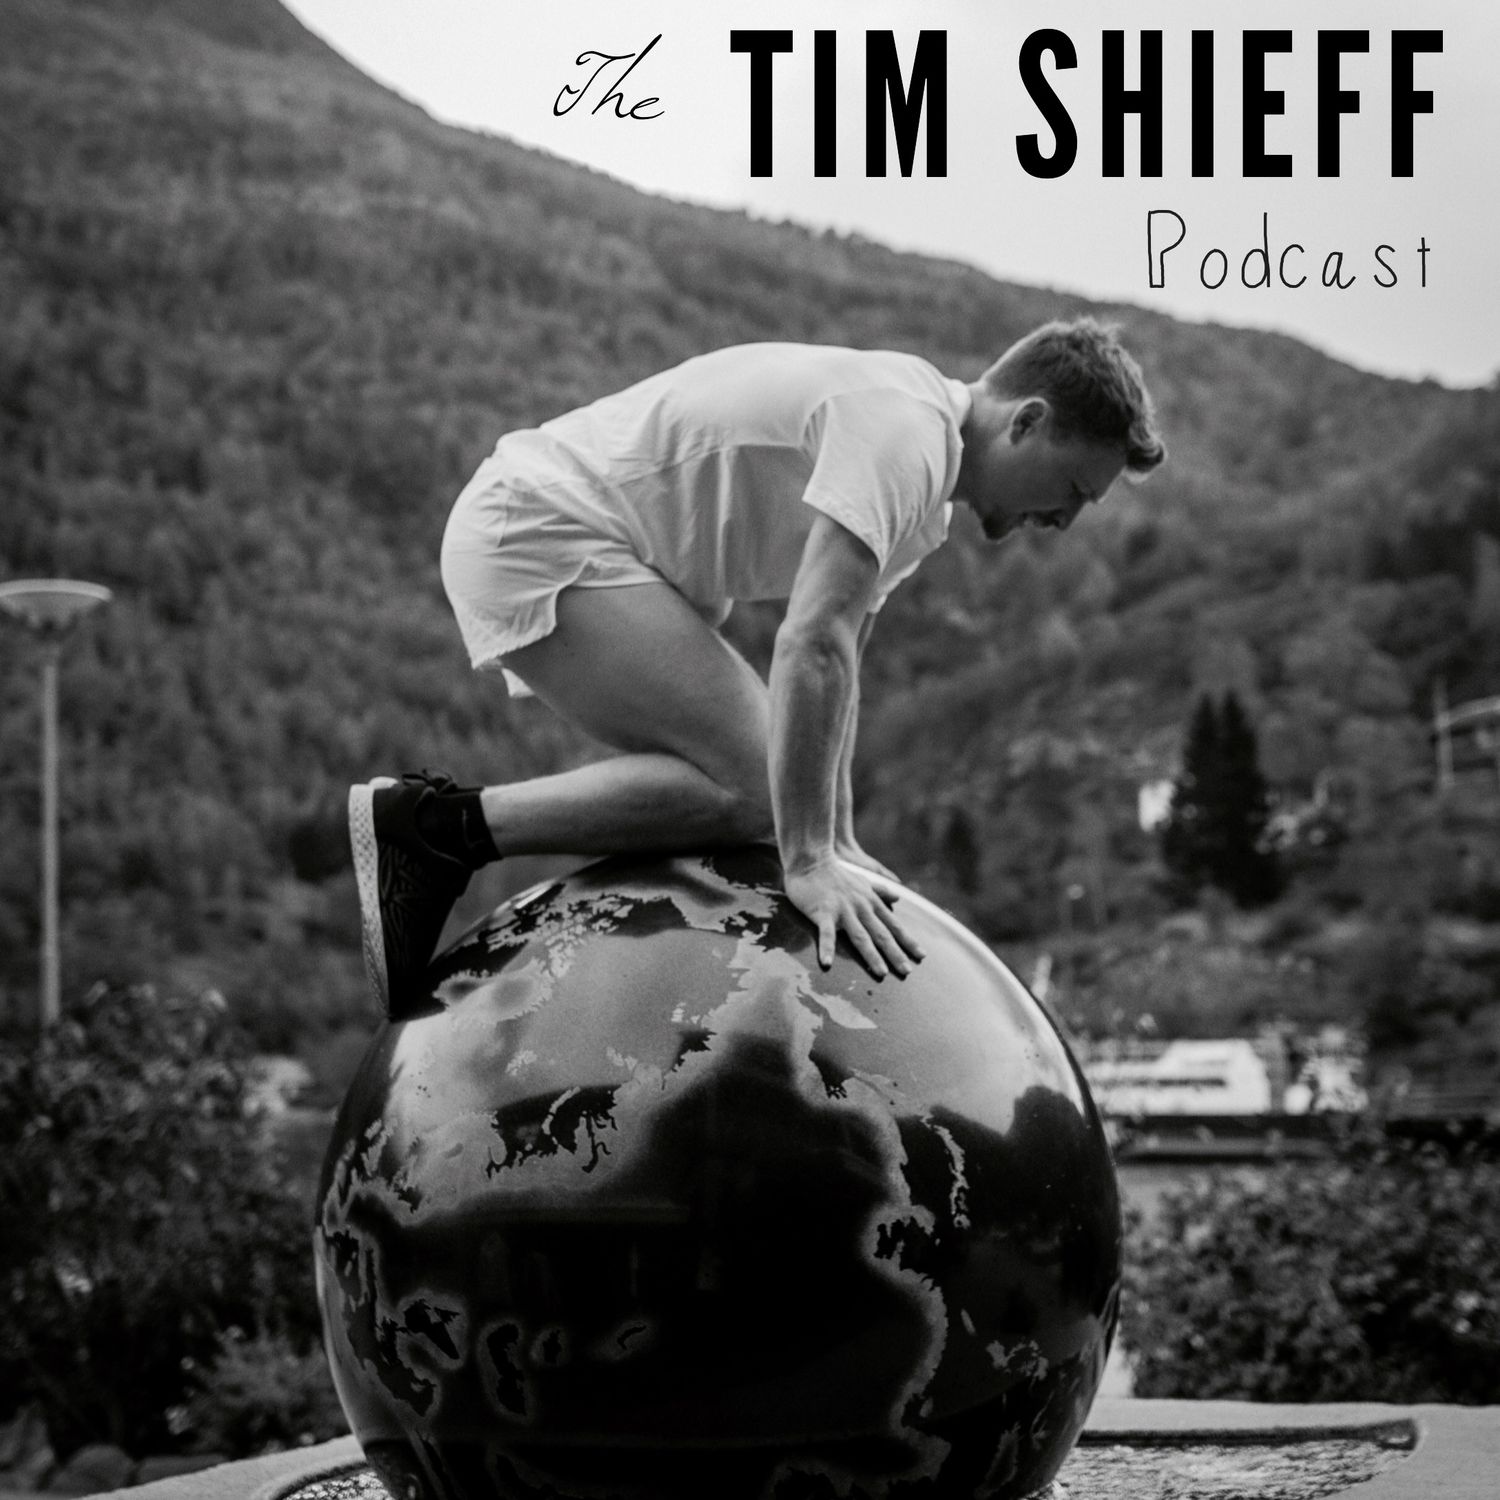 The Tim Shieff Podcast